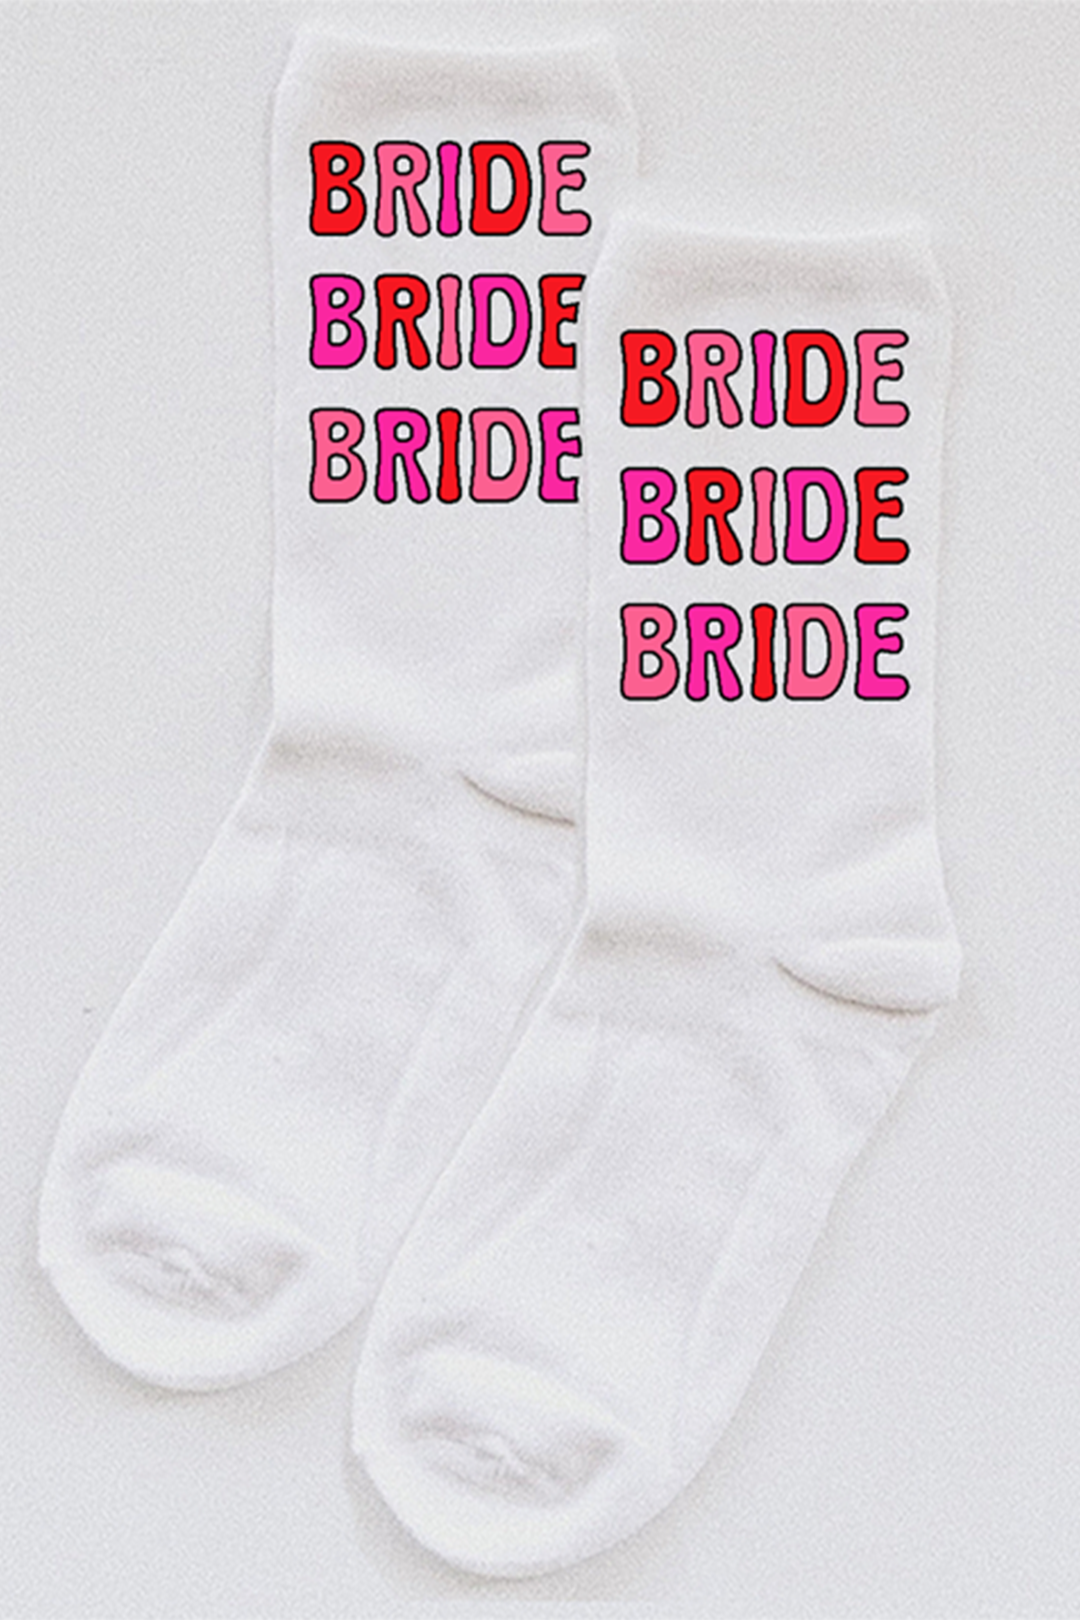 Bride Bubble Letter socks - choose your colors! – Spikes and Seams